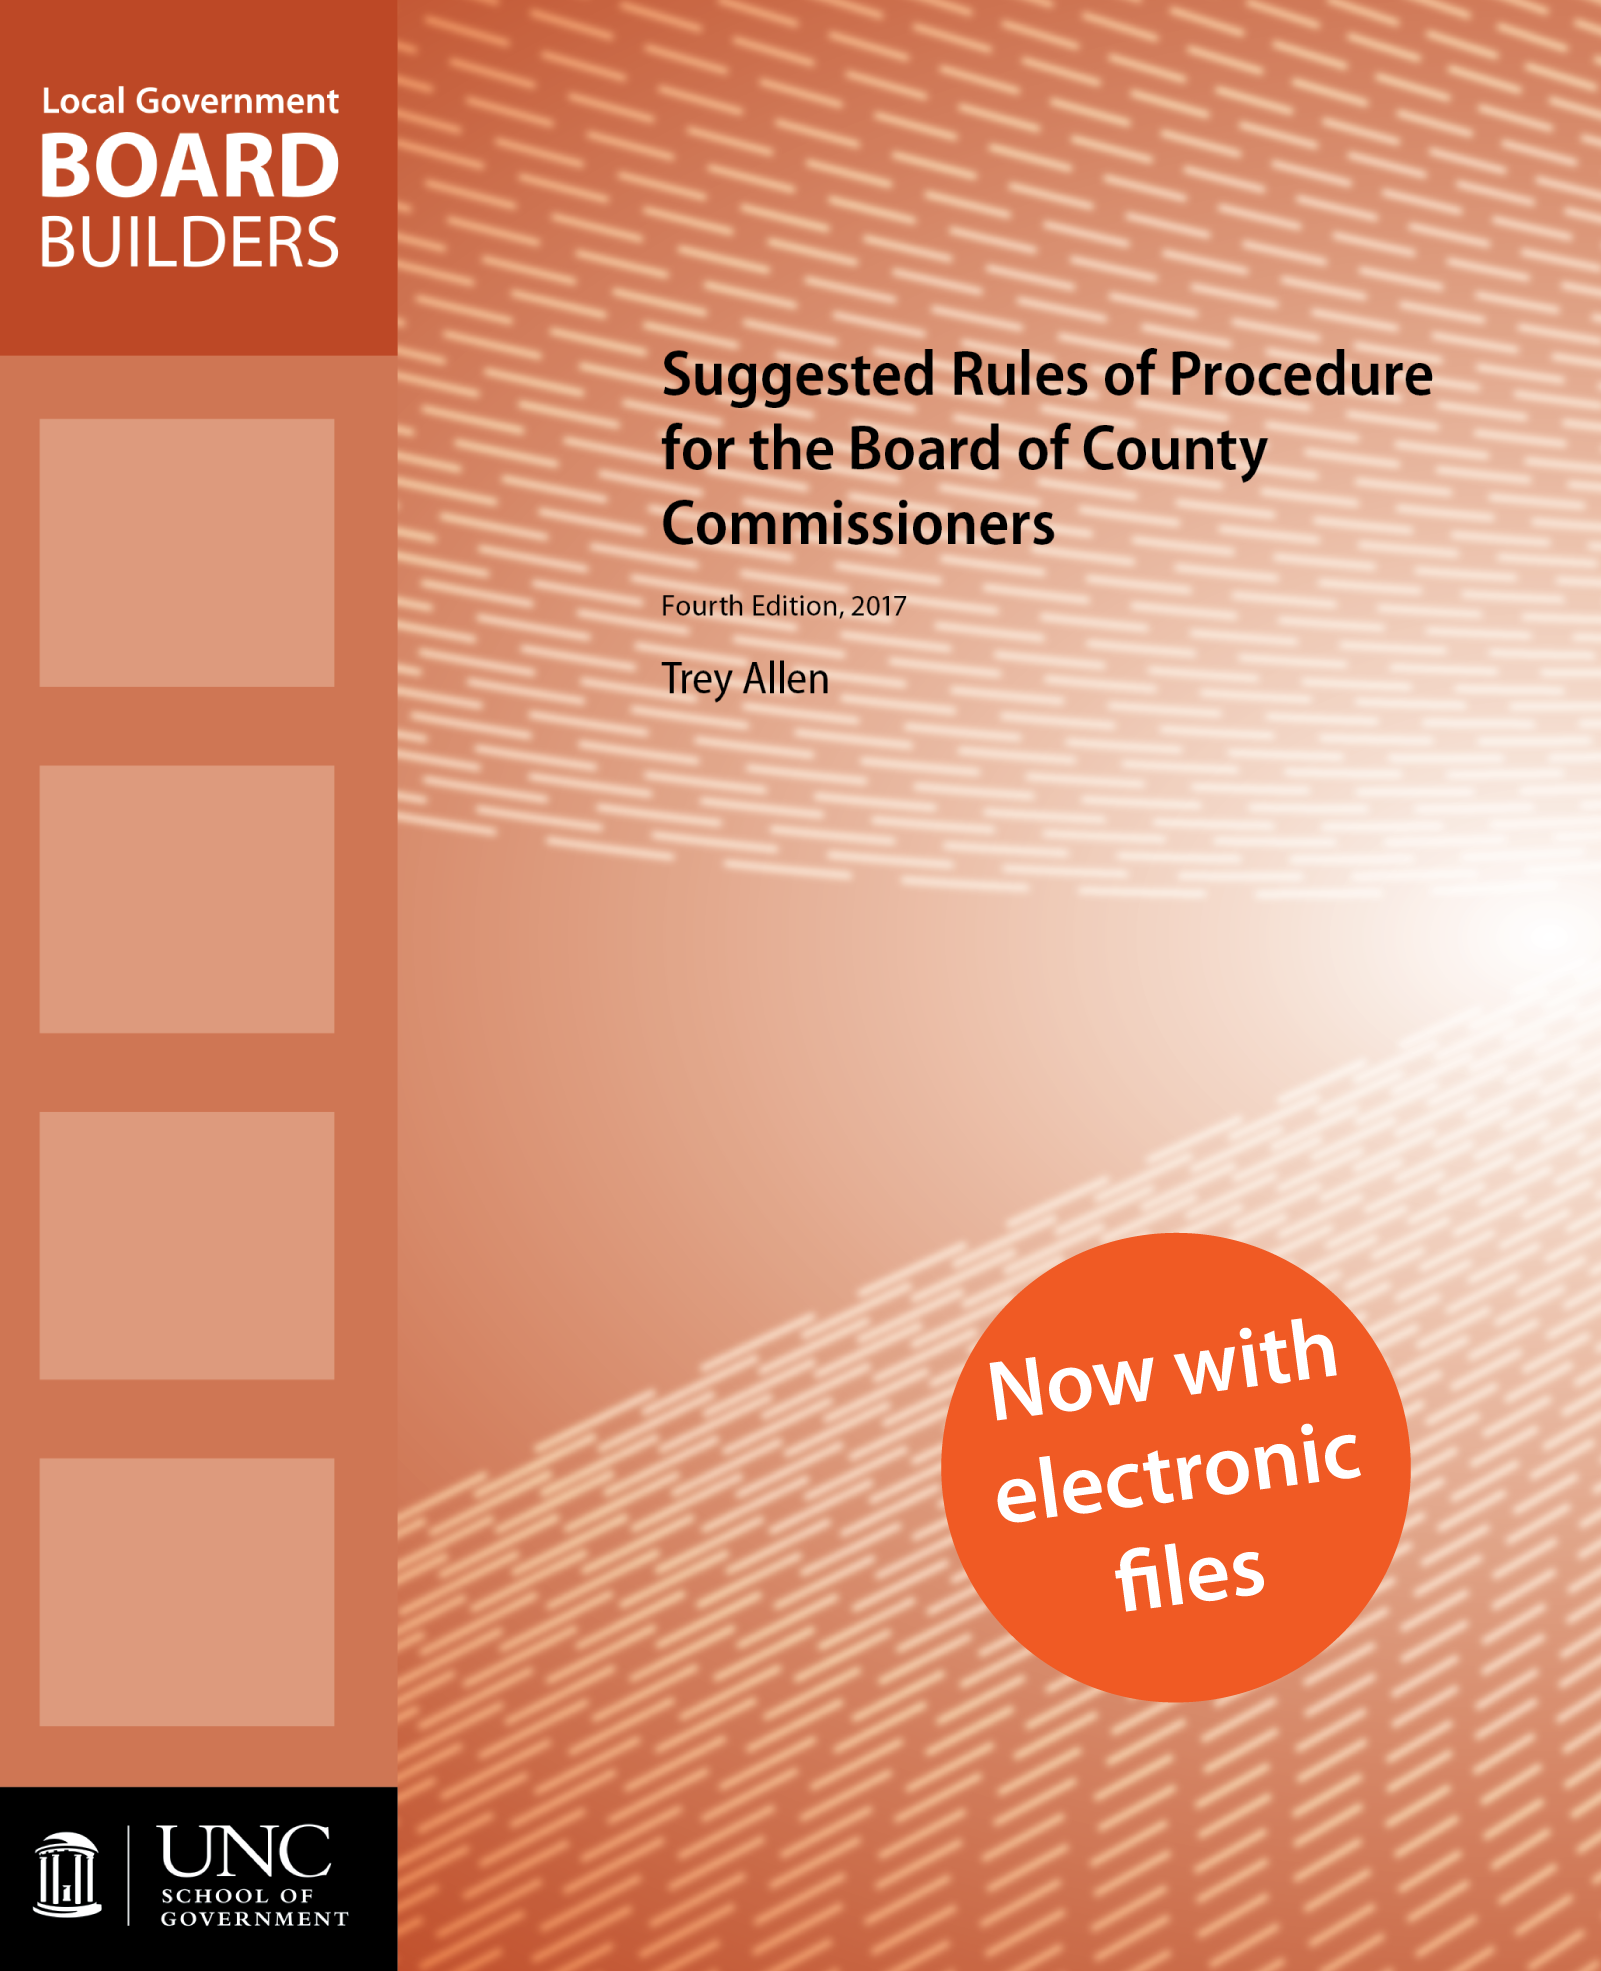 Cover Image for the Suggested Rules of Procedure for the Board of County Commisioners